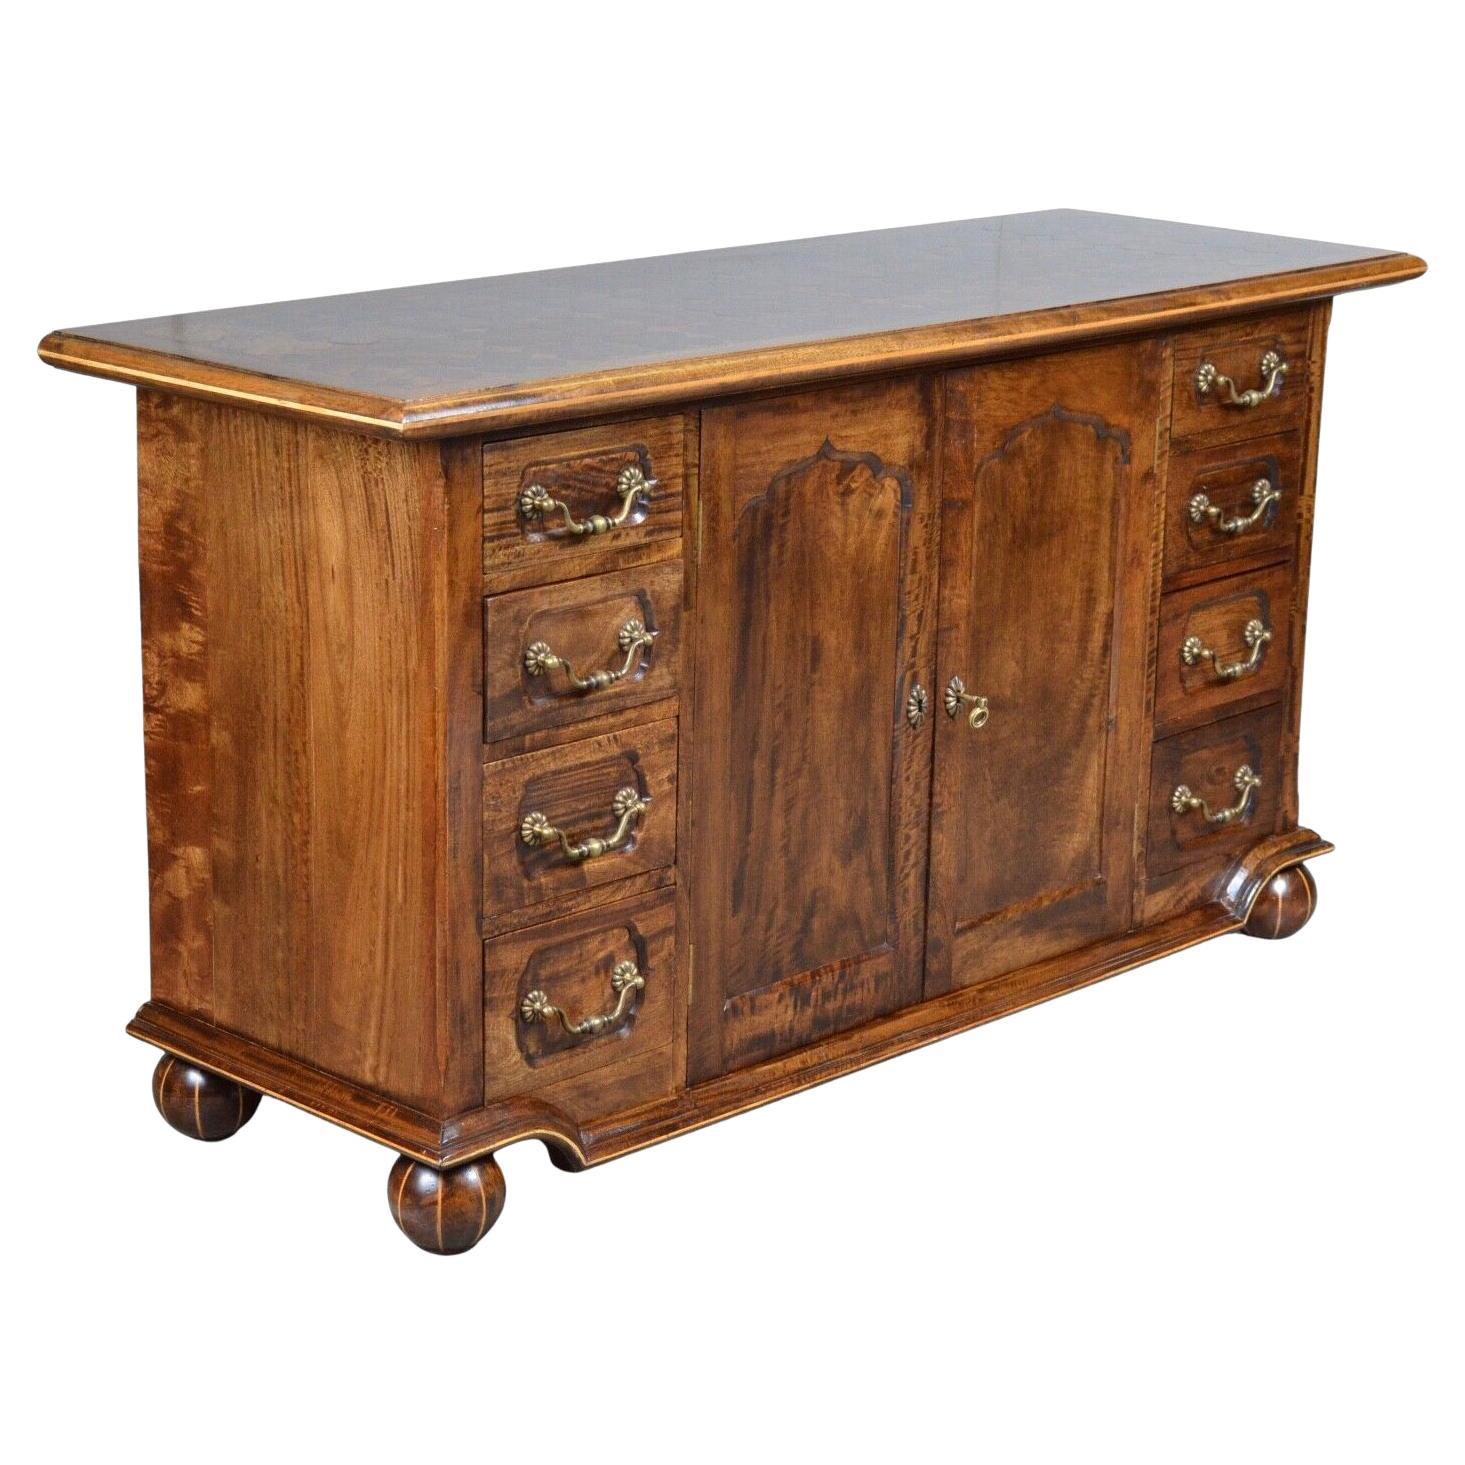 Quality Antique Walnut Parquetry Inlaid Hardwood Sideboard /Table&Ch Available